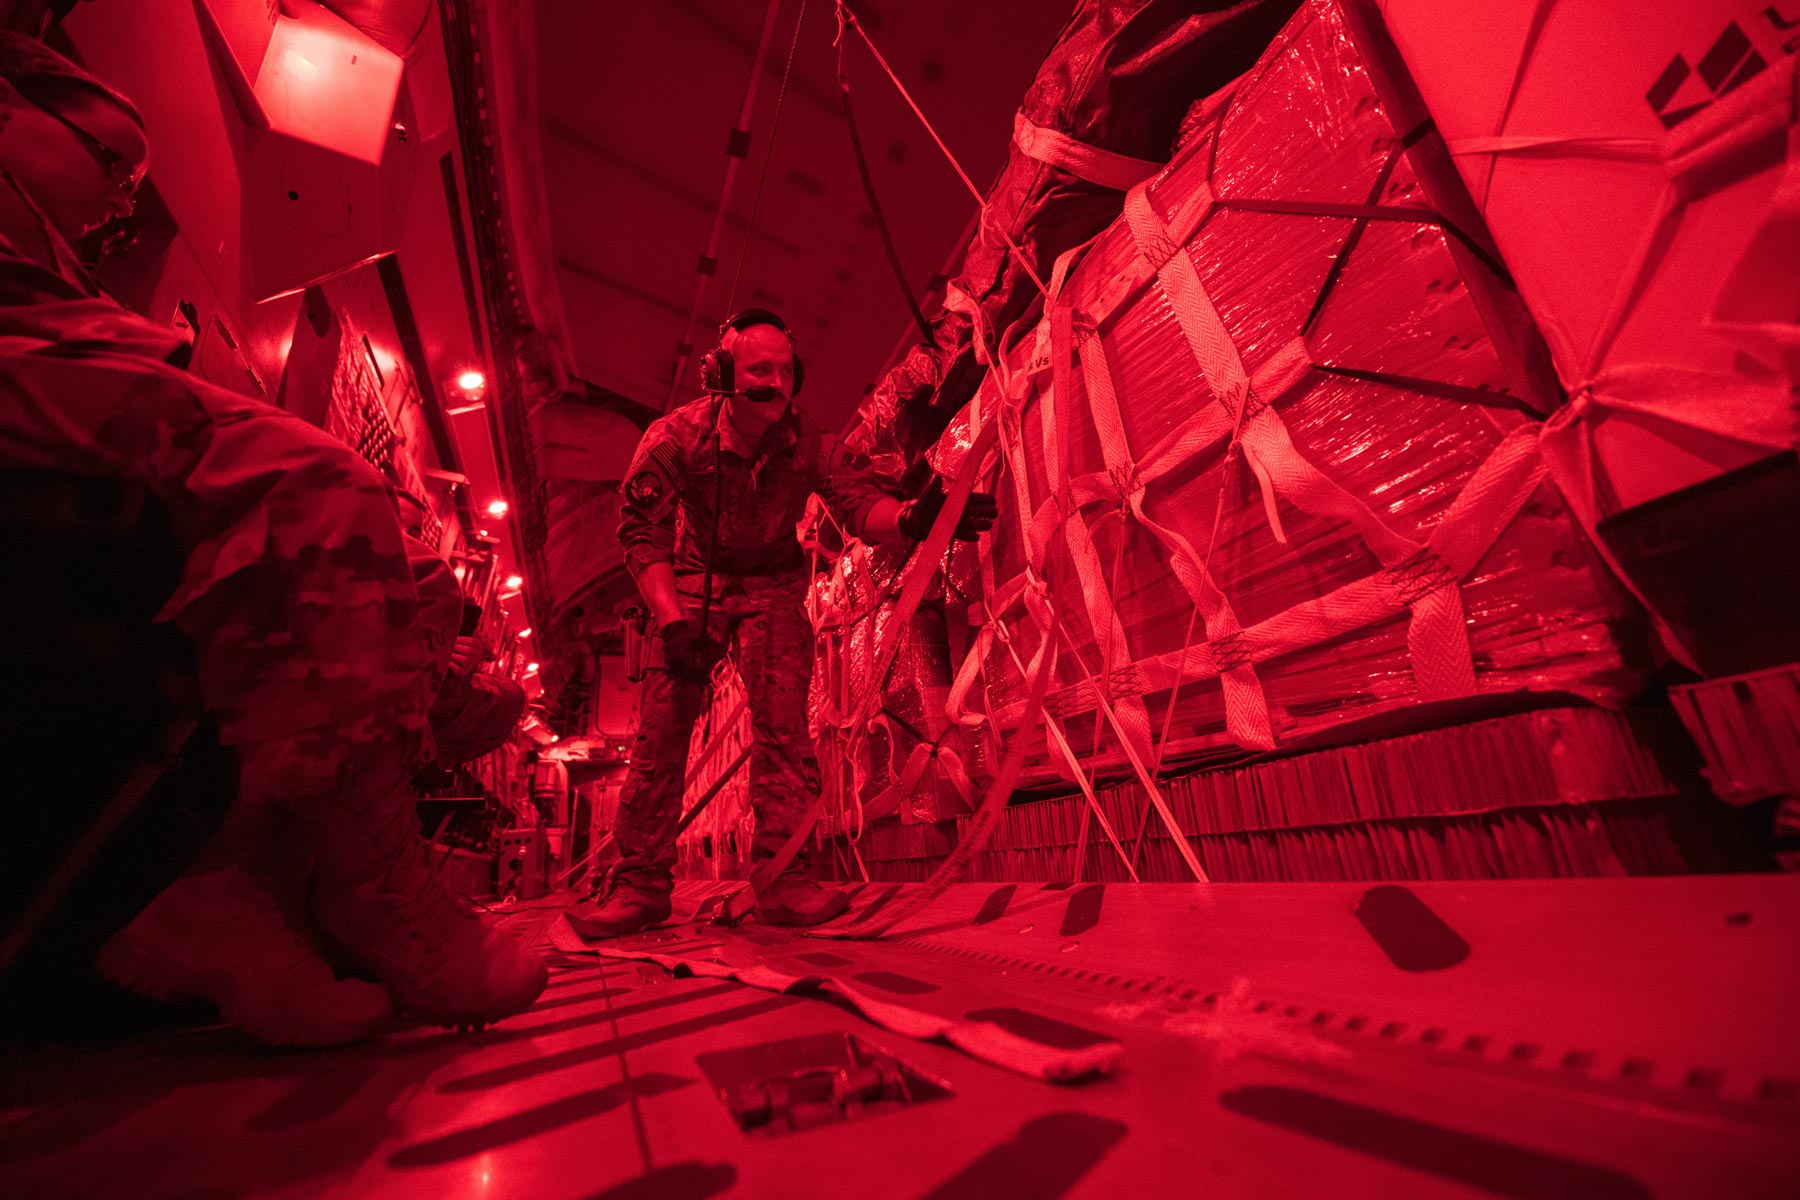 C-17 Globemaster Makes 1st Airdrop in Afghanistan in More Than a Year